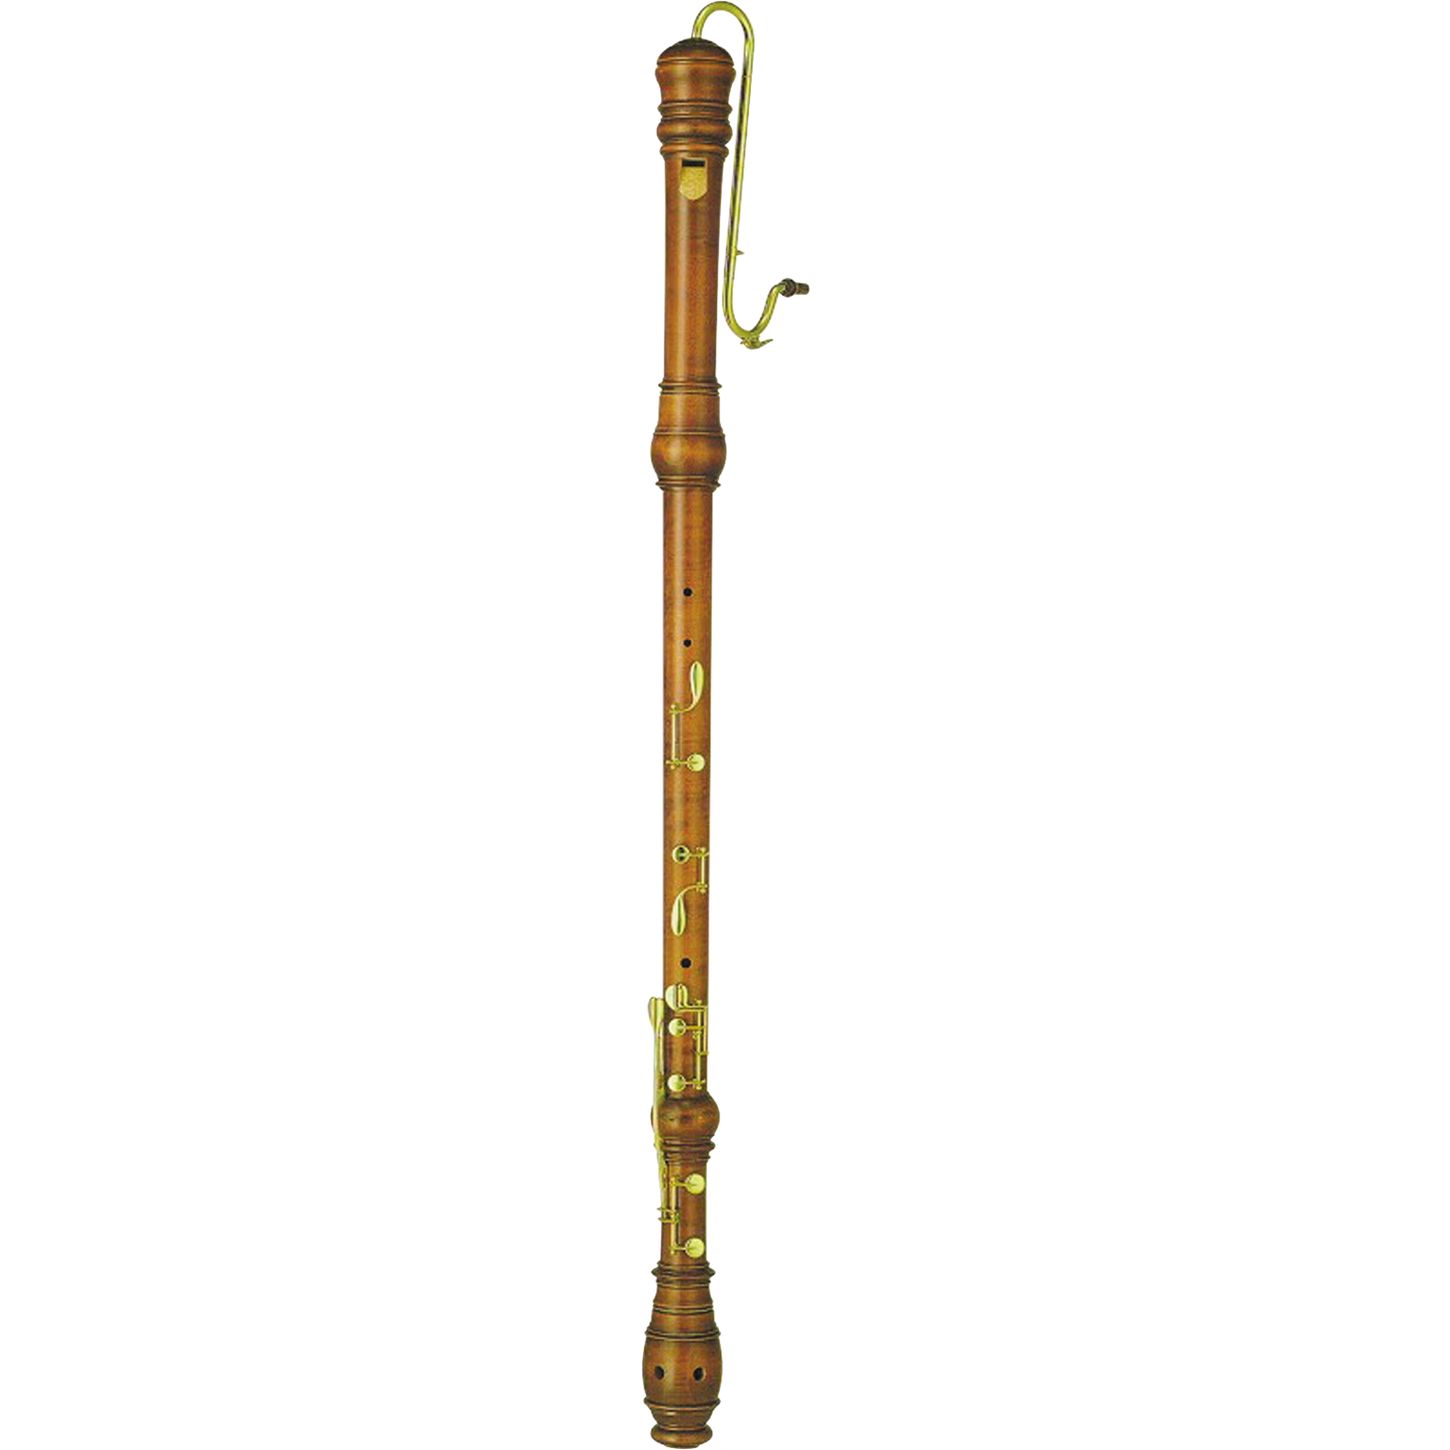 great bass recorder